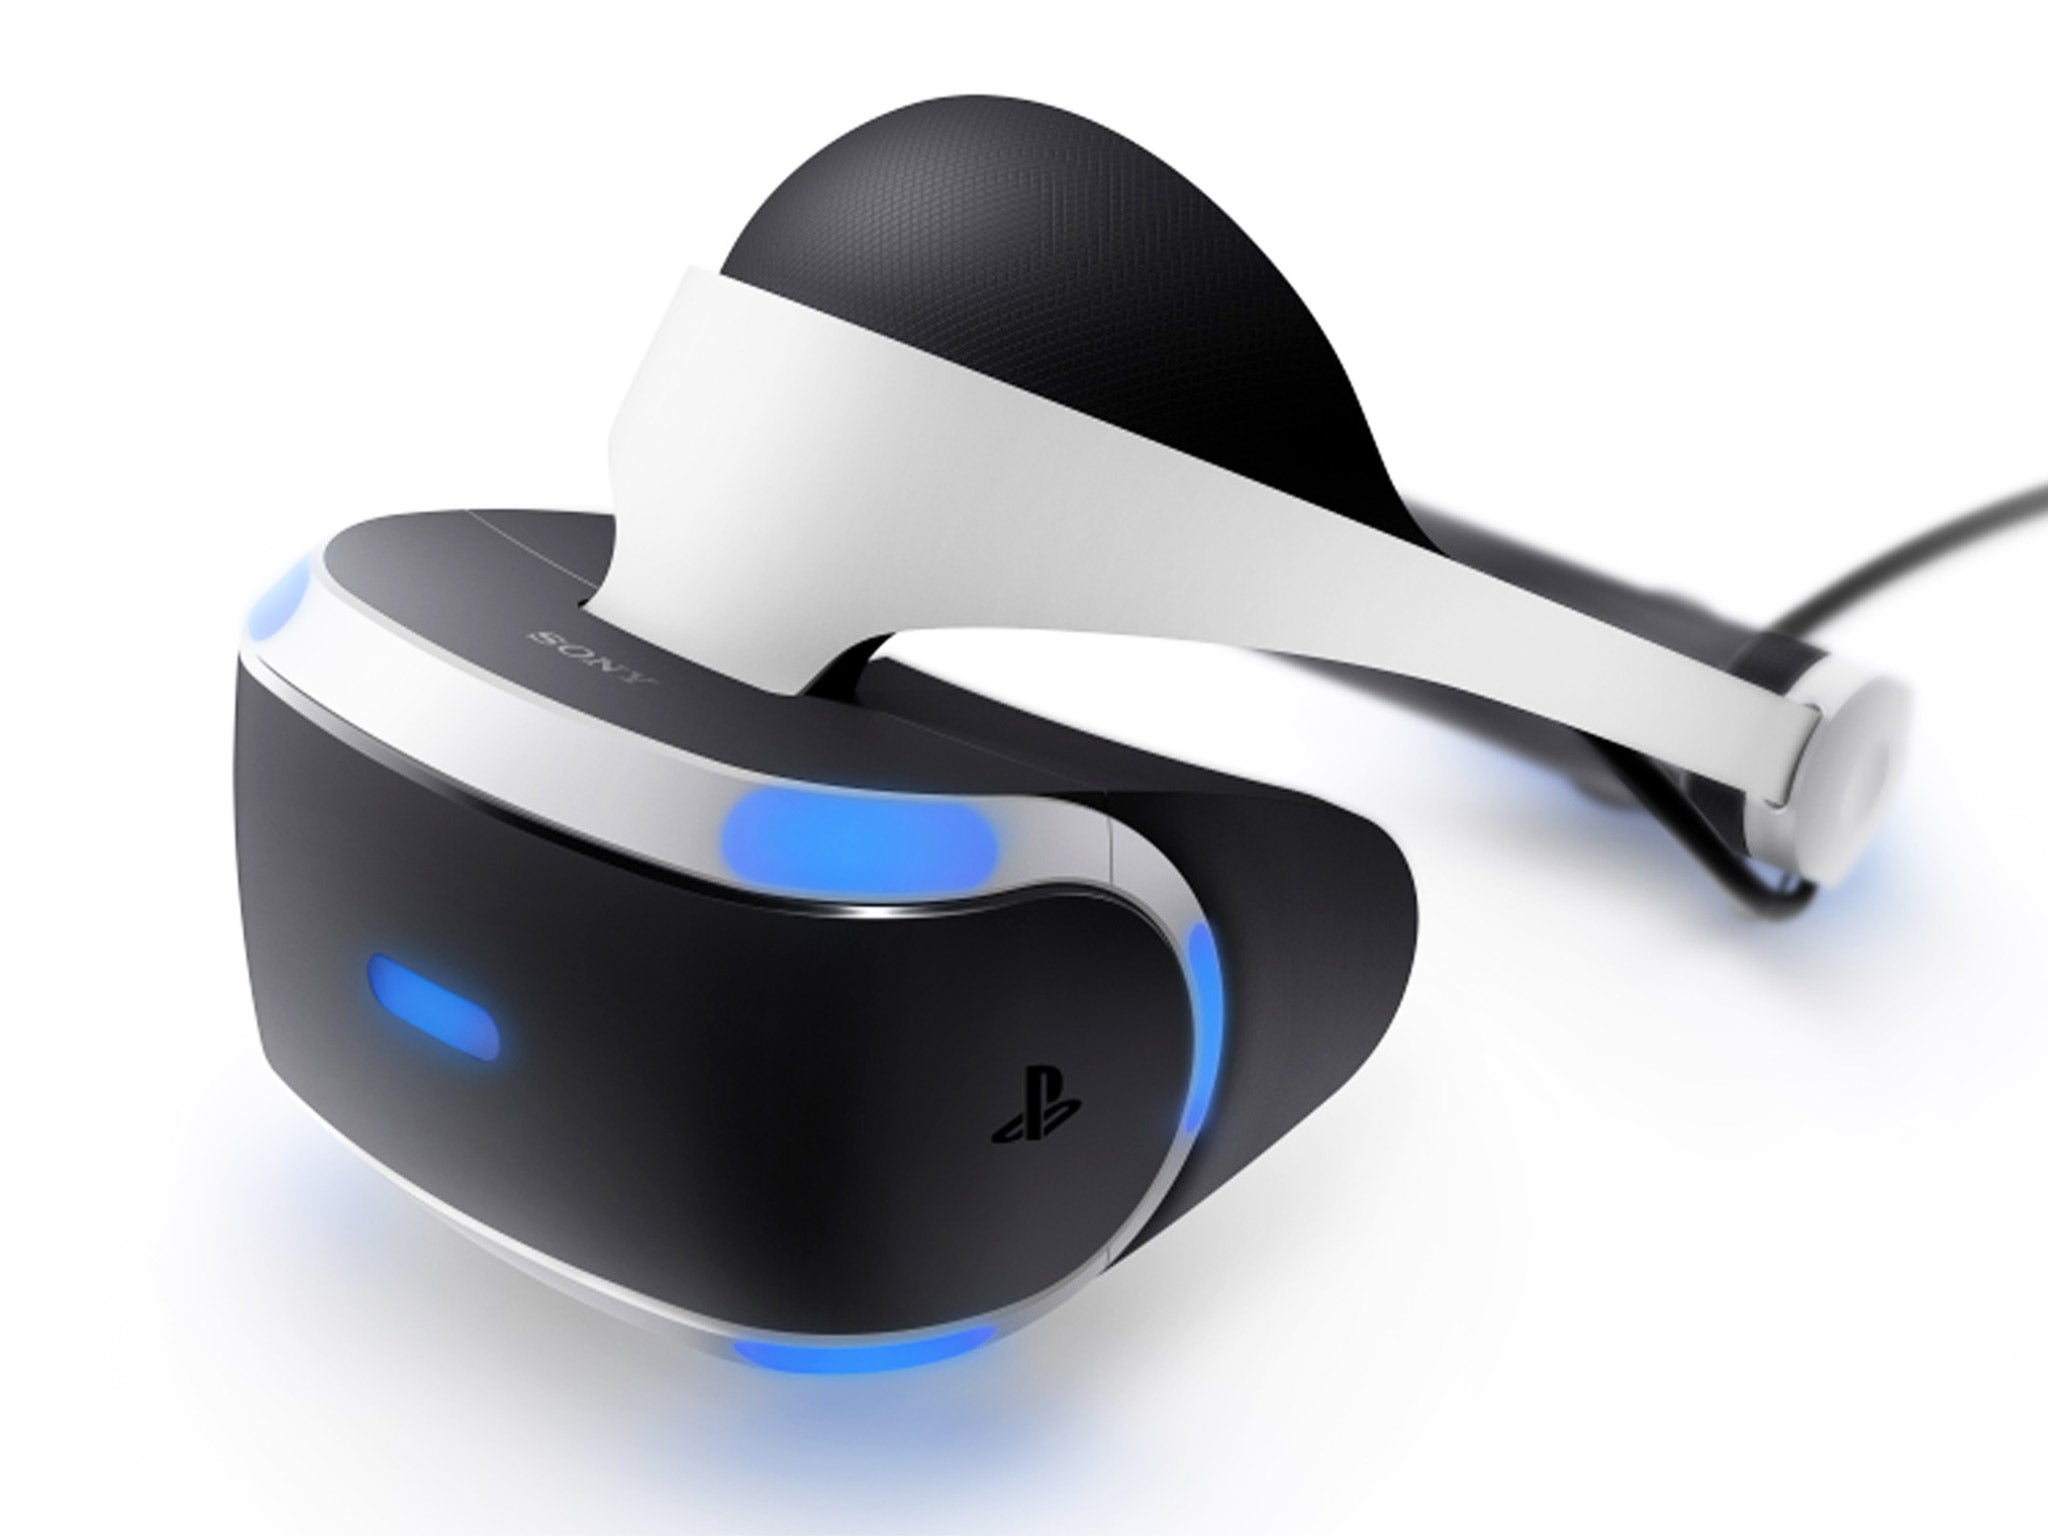 The virtual reality console will retail at £349 .99 upon its October release